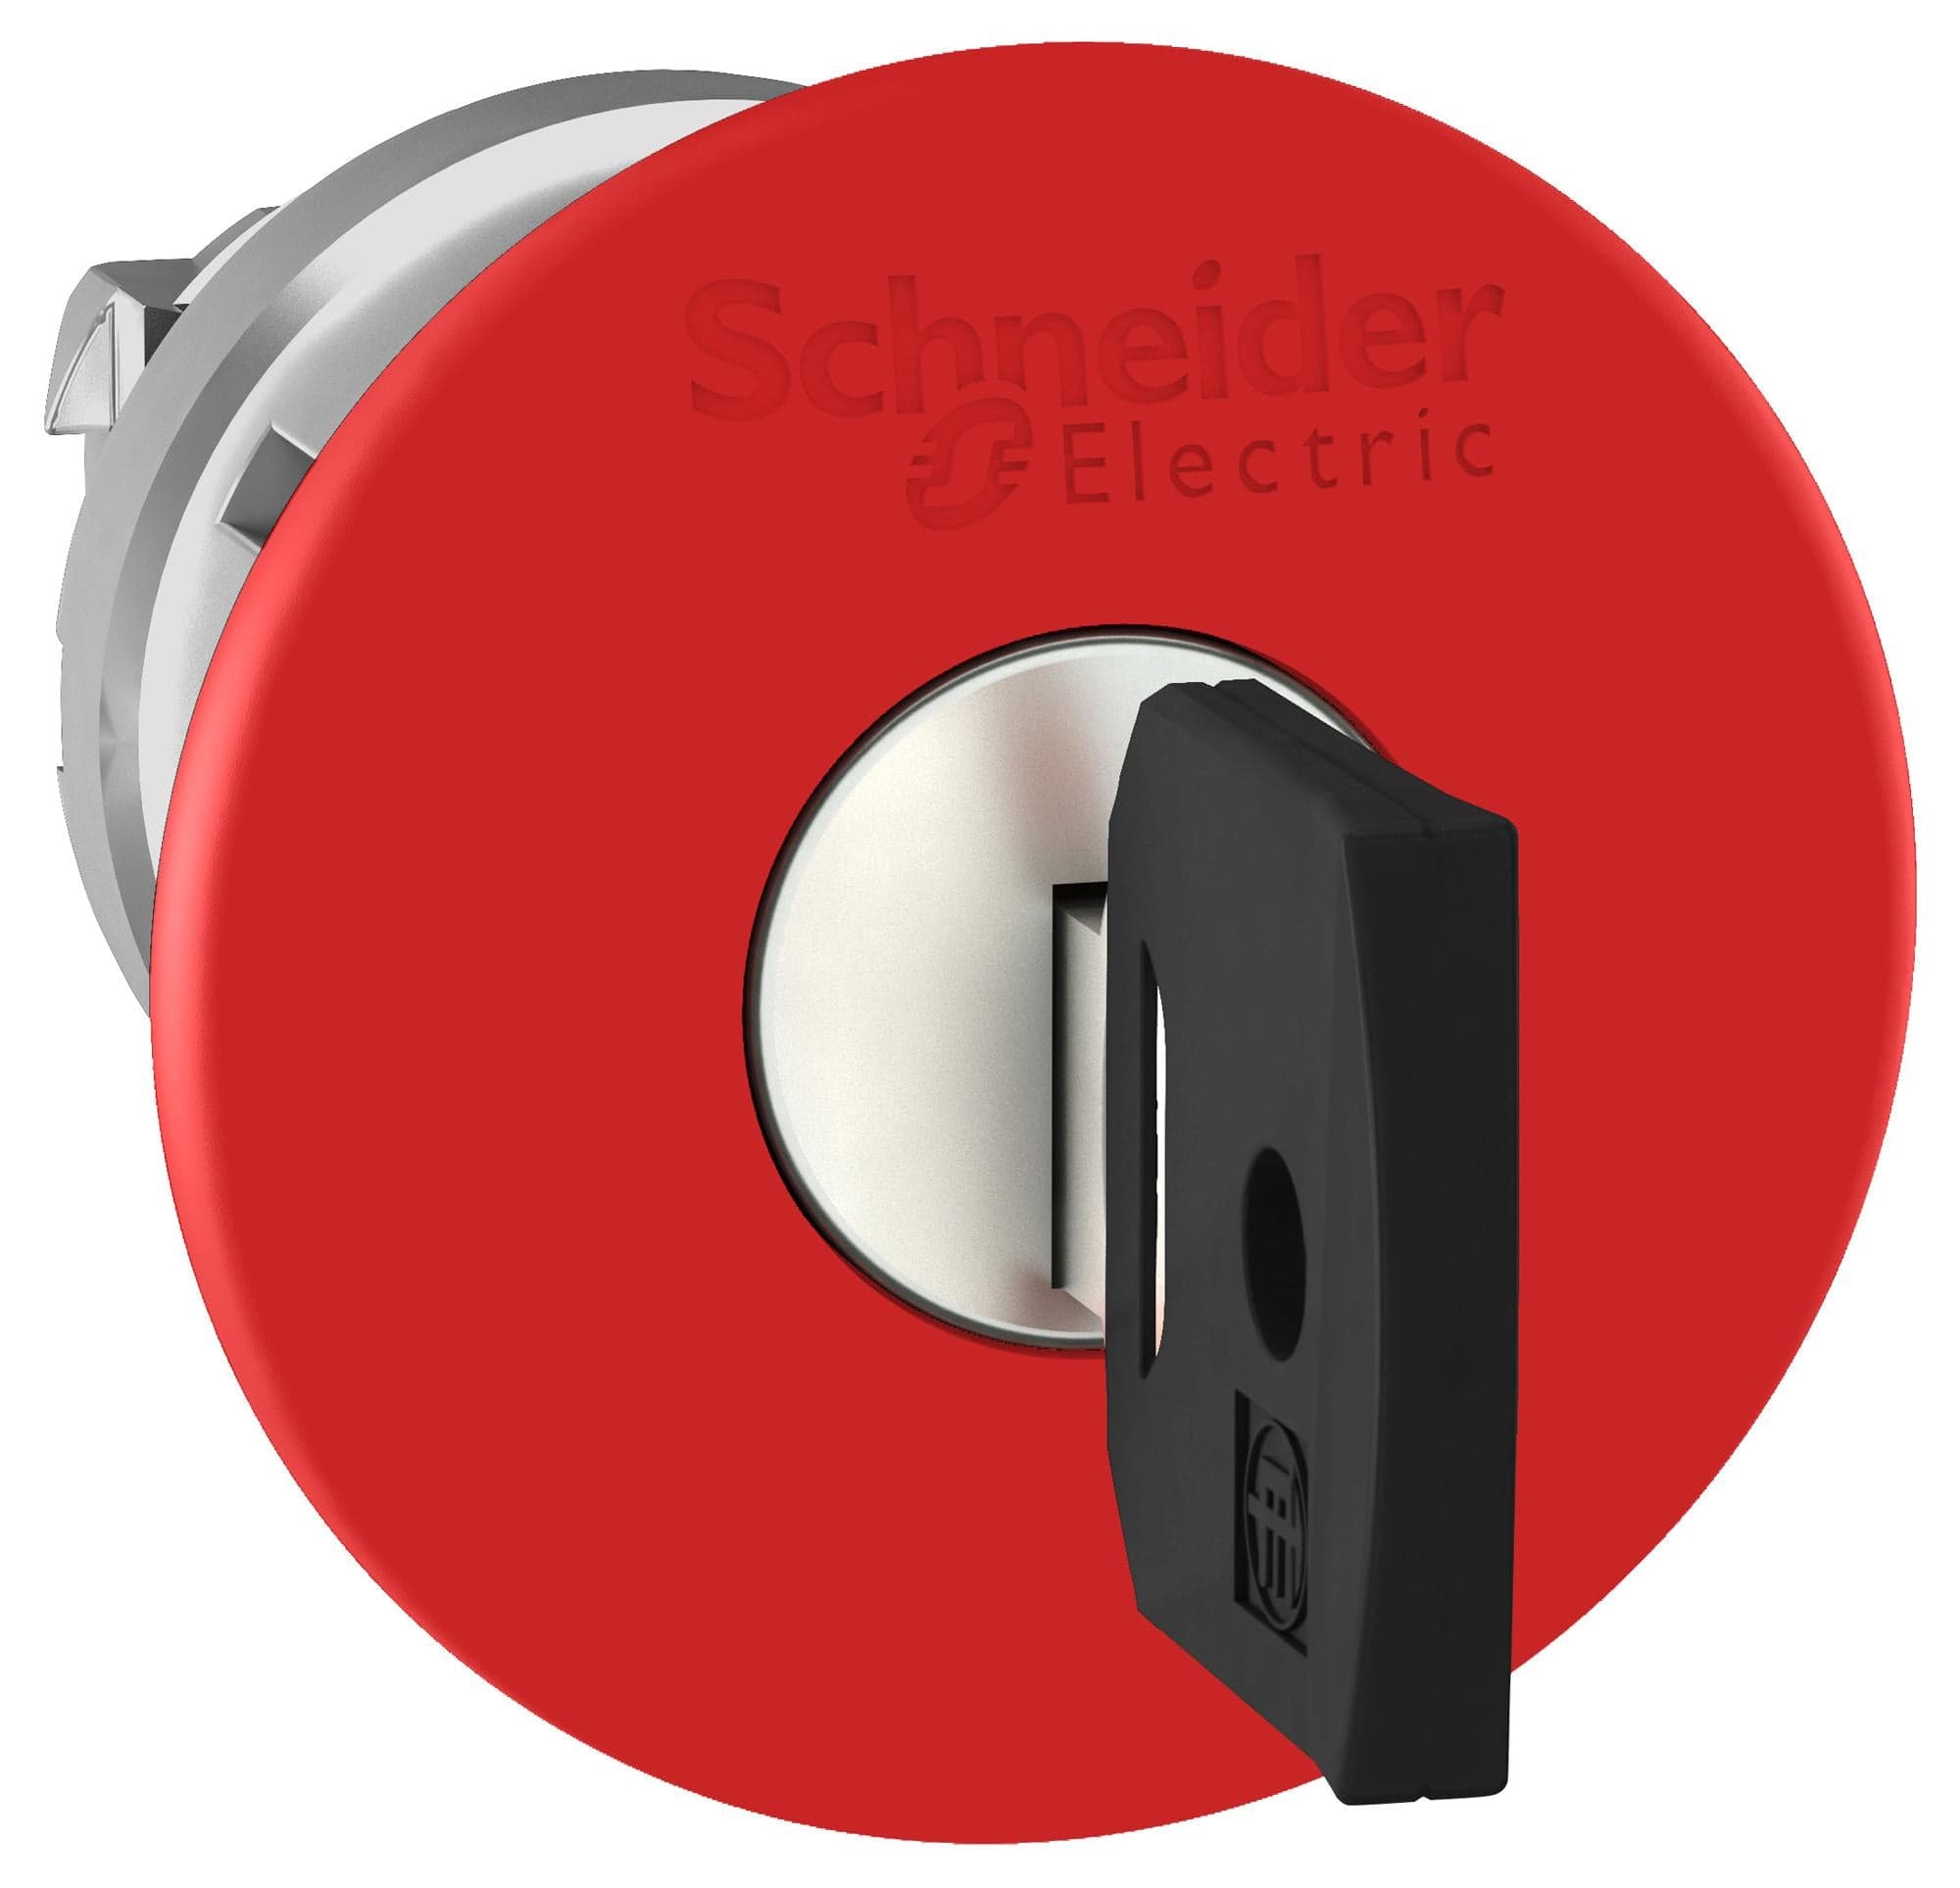 SCHNEIDER ELECTRIC Actuators ZB4BS94410 SWITCH ACTUATOR, RED, KEY RELEASE E-STOP SCHNEIDER ELECTRIC 3109515 ZB4BS94410